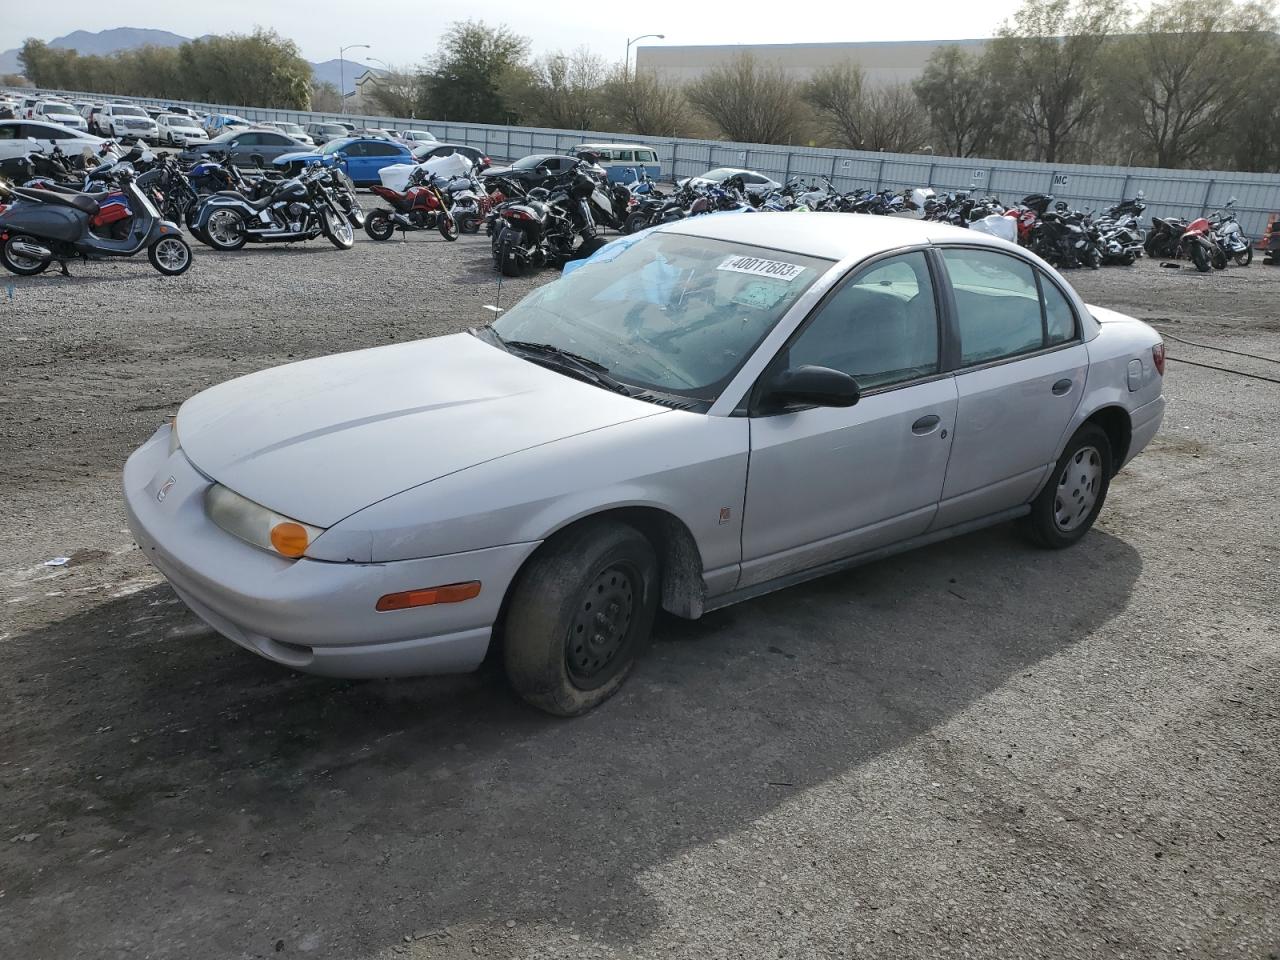 2001 Saturn SL1 for sale at Copart Las Vegas, NV Lot #40017*** |  SalvageReseller.com